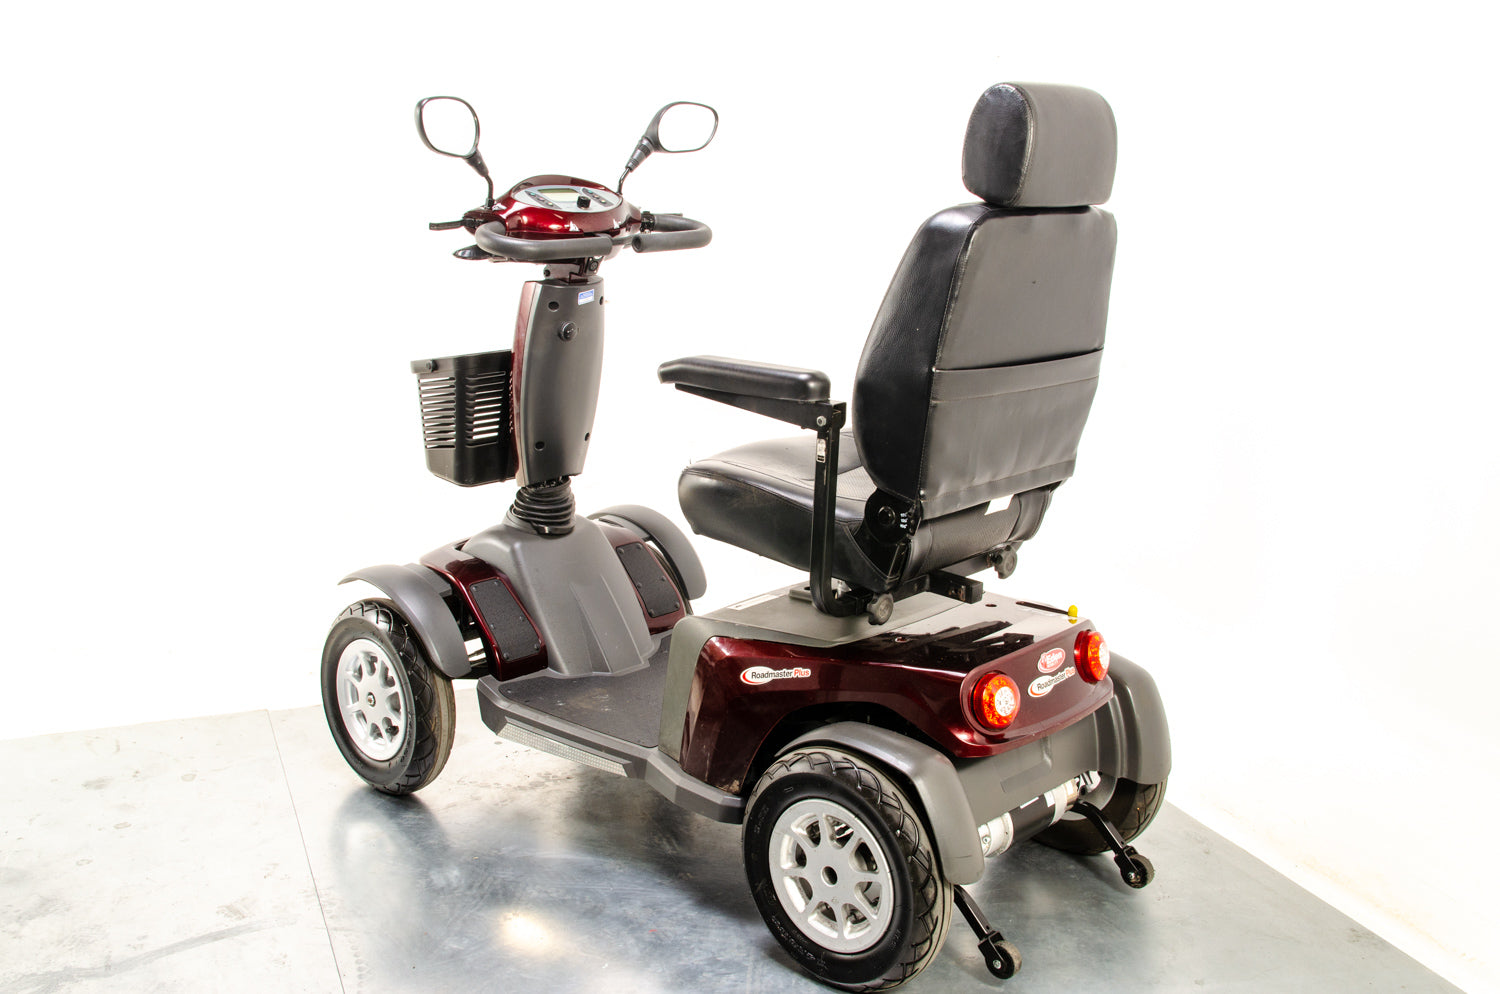 Eden Roadmaster Plus All-Terrain Off-Road Used Mobility Scooter 8mph ATV Luxury Electric Large 14000